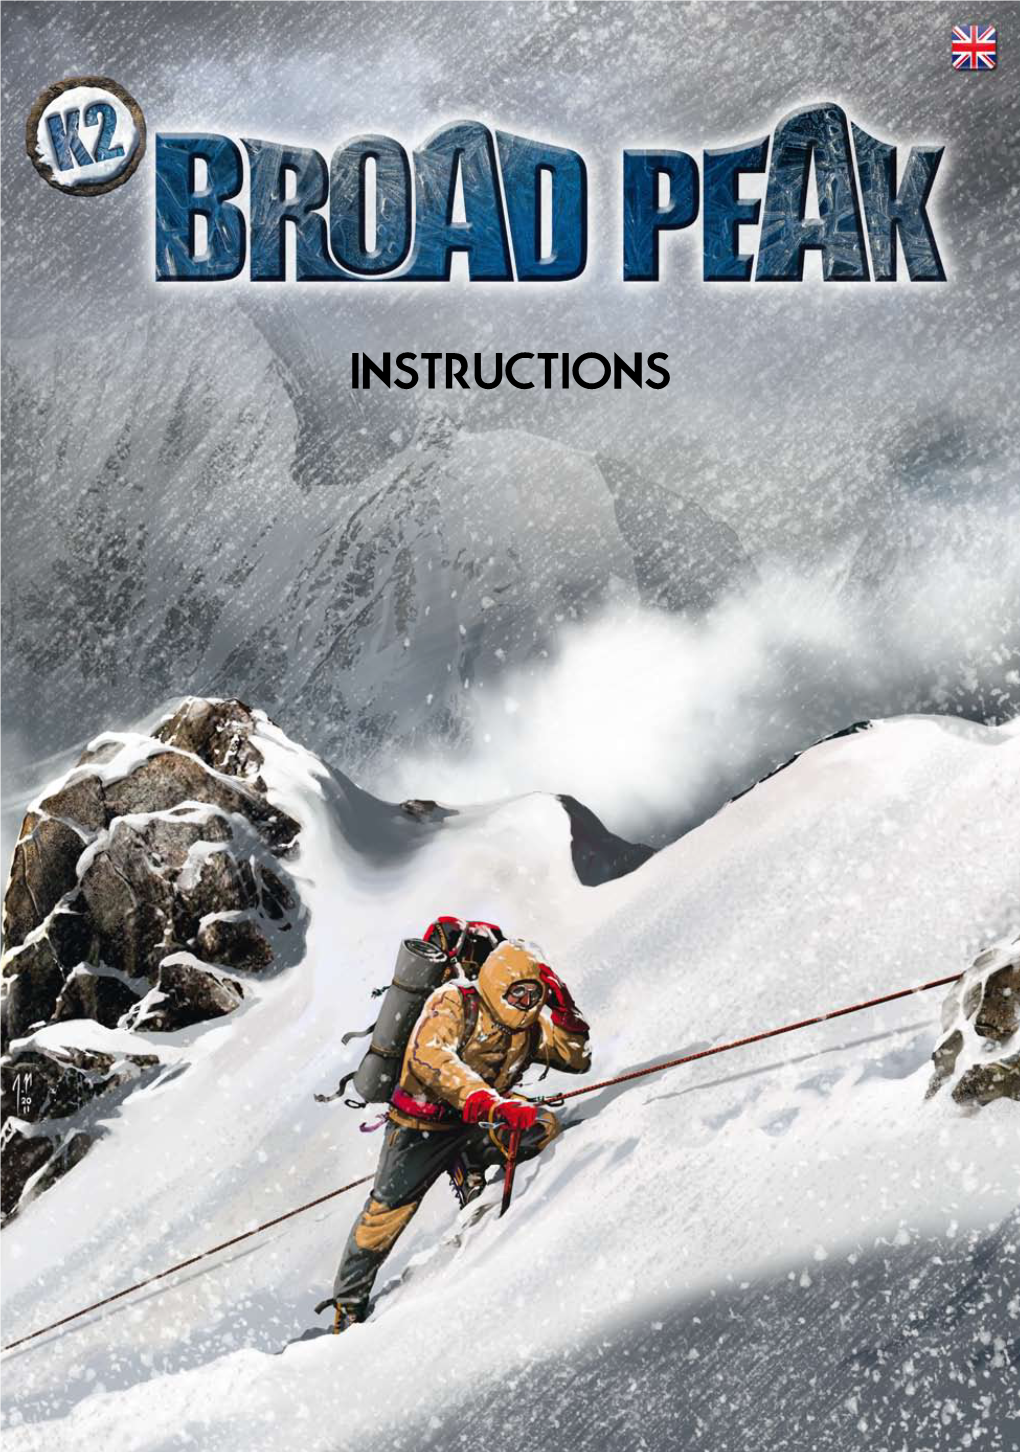 Broad Peak Is an Expansion for the Game K2 Which Provides Two New Scenarios Inspired by Historical Achievements of Polish Climbers